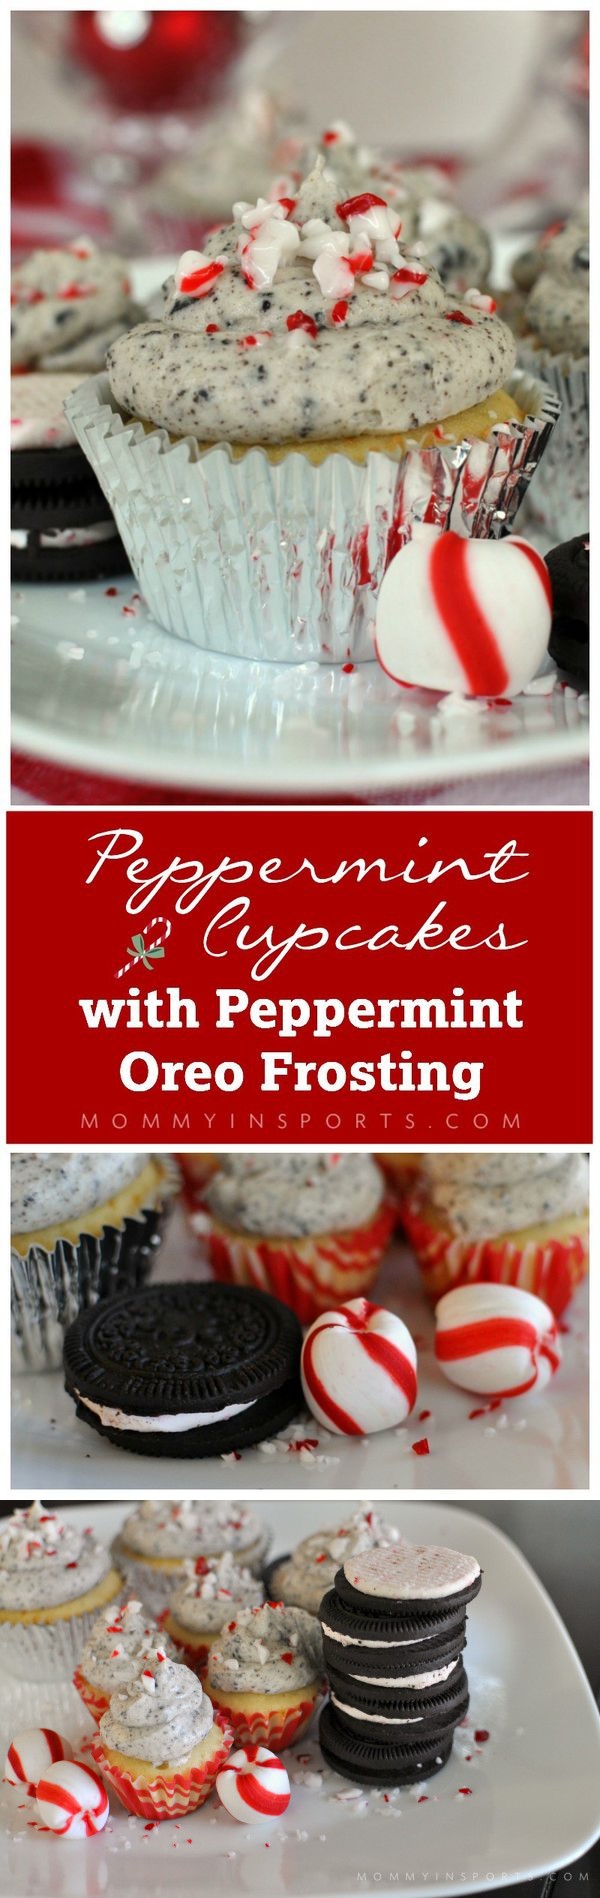 Perfect Vanilla Peppermint Cupcakes with Peppermint Oreo Frosting